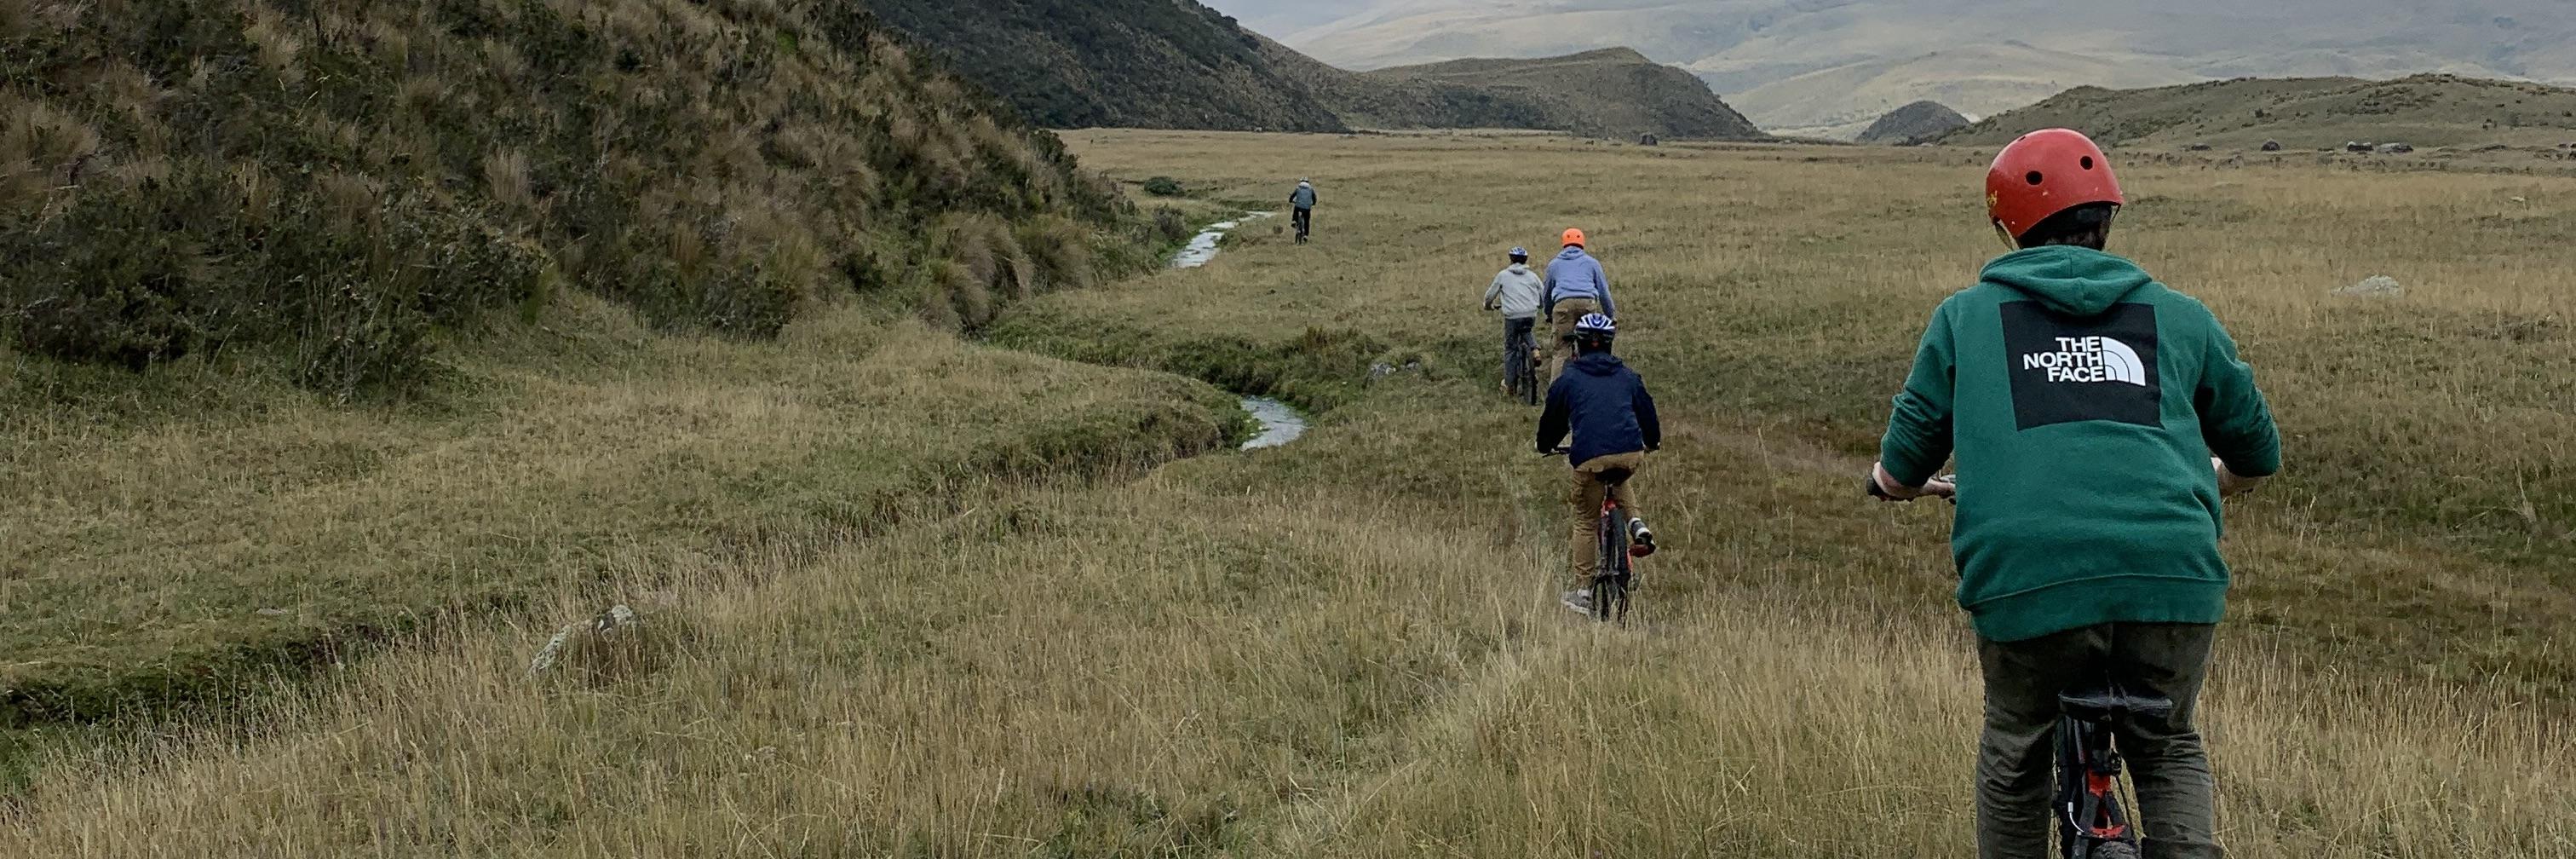 Student bike on a path through fields of rolling hills in Ecuador.